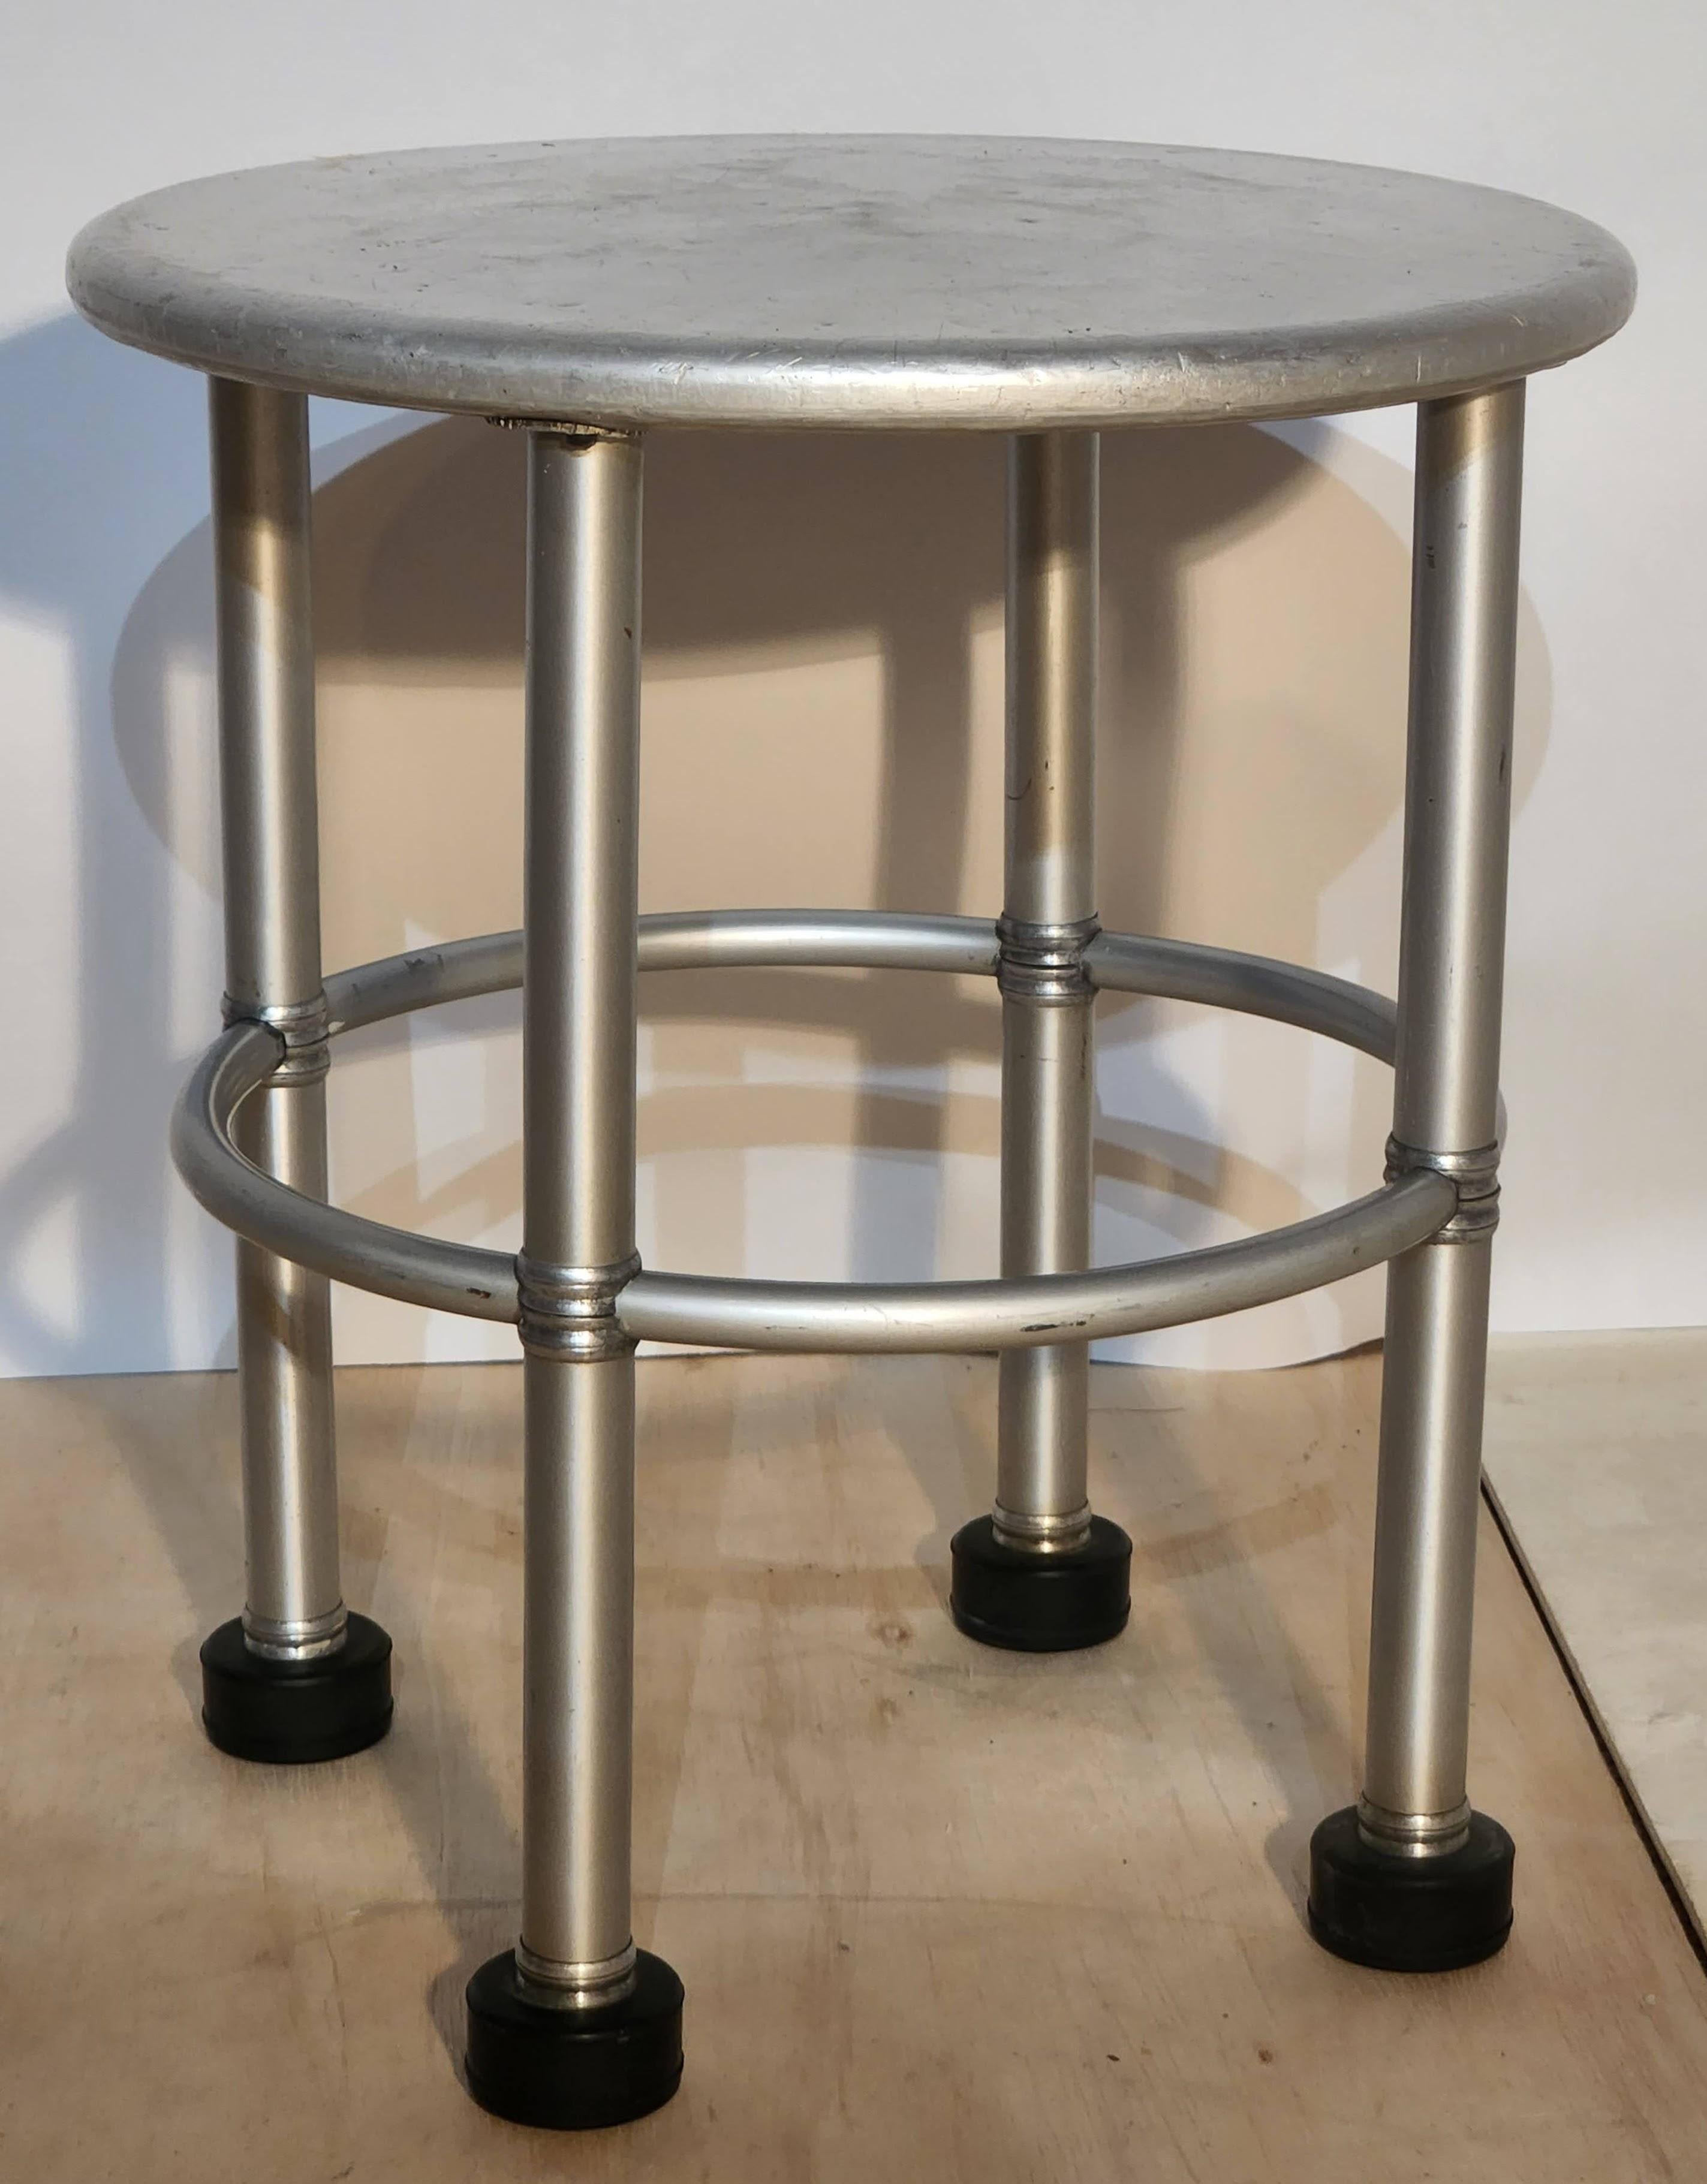 Rare Early Warren McArthur side table with a Warren Furniture Company Los Angeles, California labeled and dated 1931, Model 1200.
It is rare to find a piece from The Arizona Biltmore and even rarer to find a piece with its McArthur Furniture label